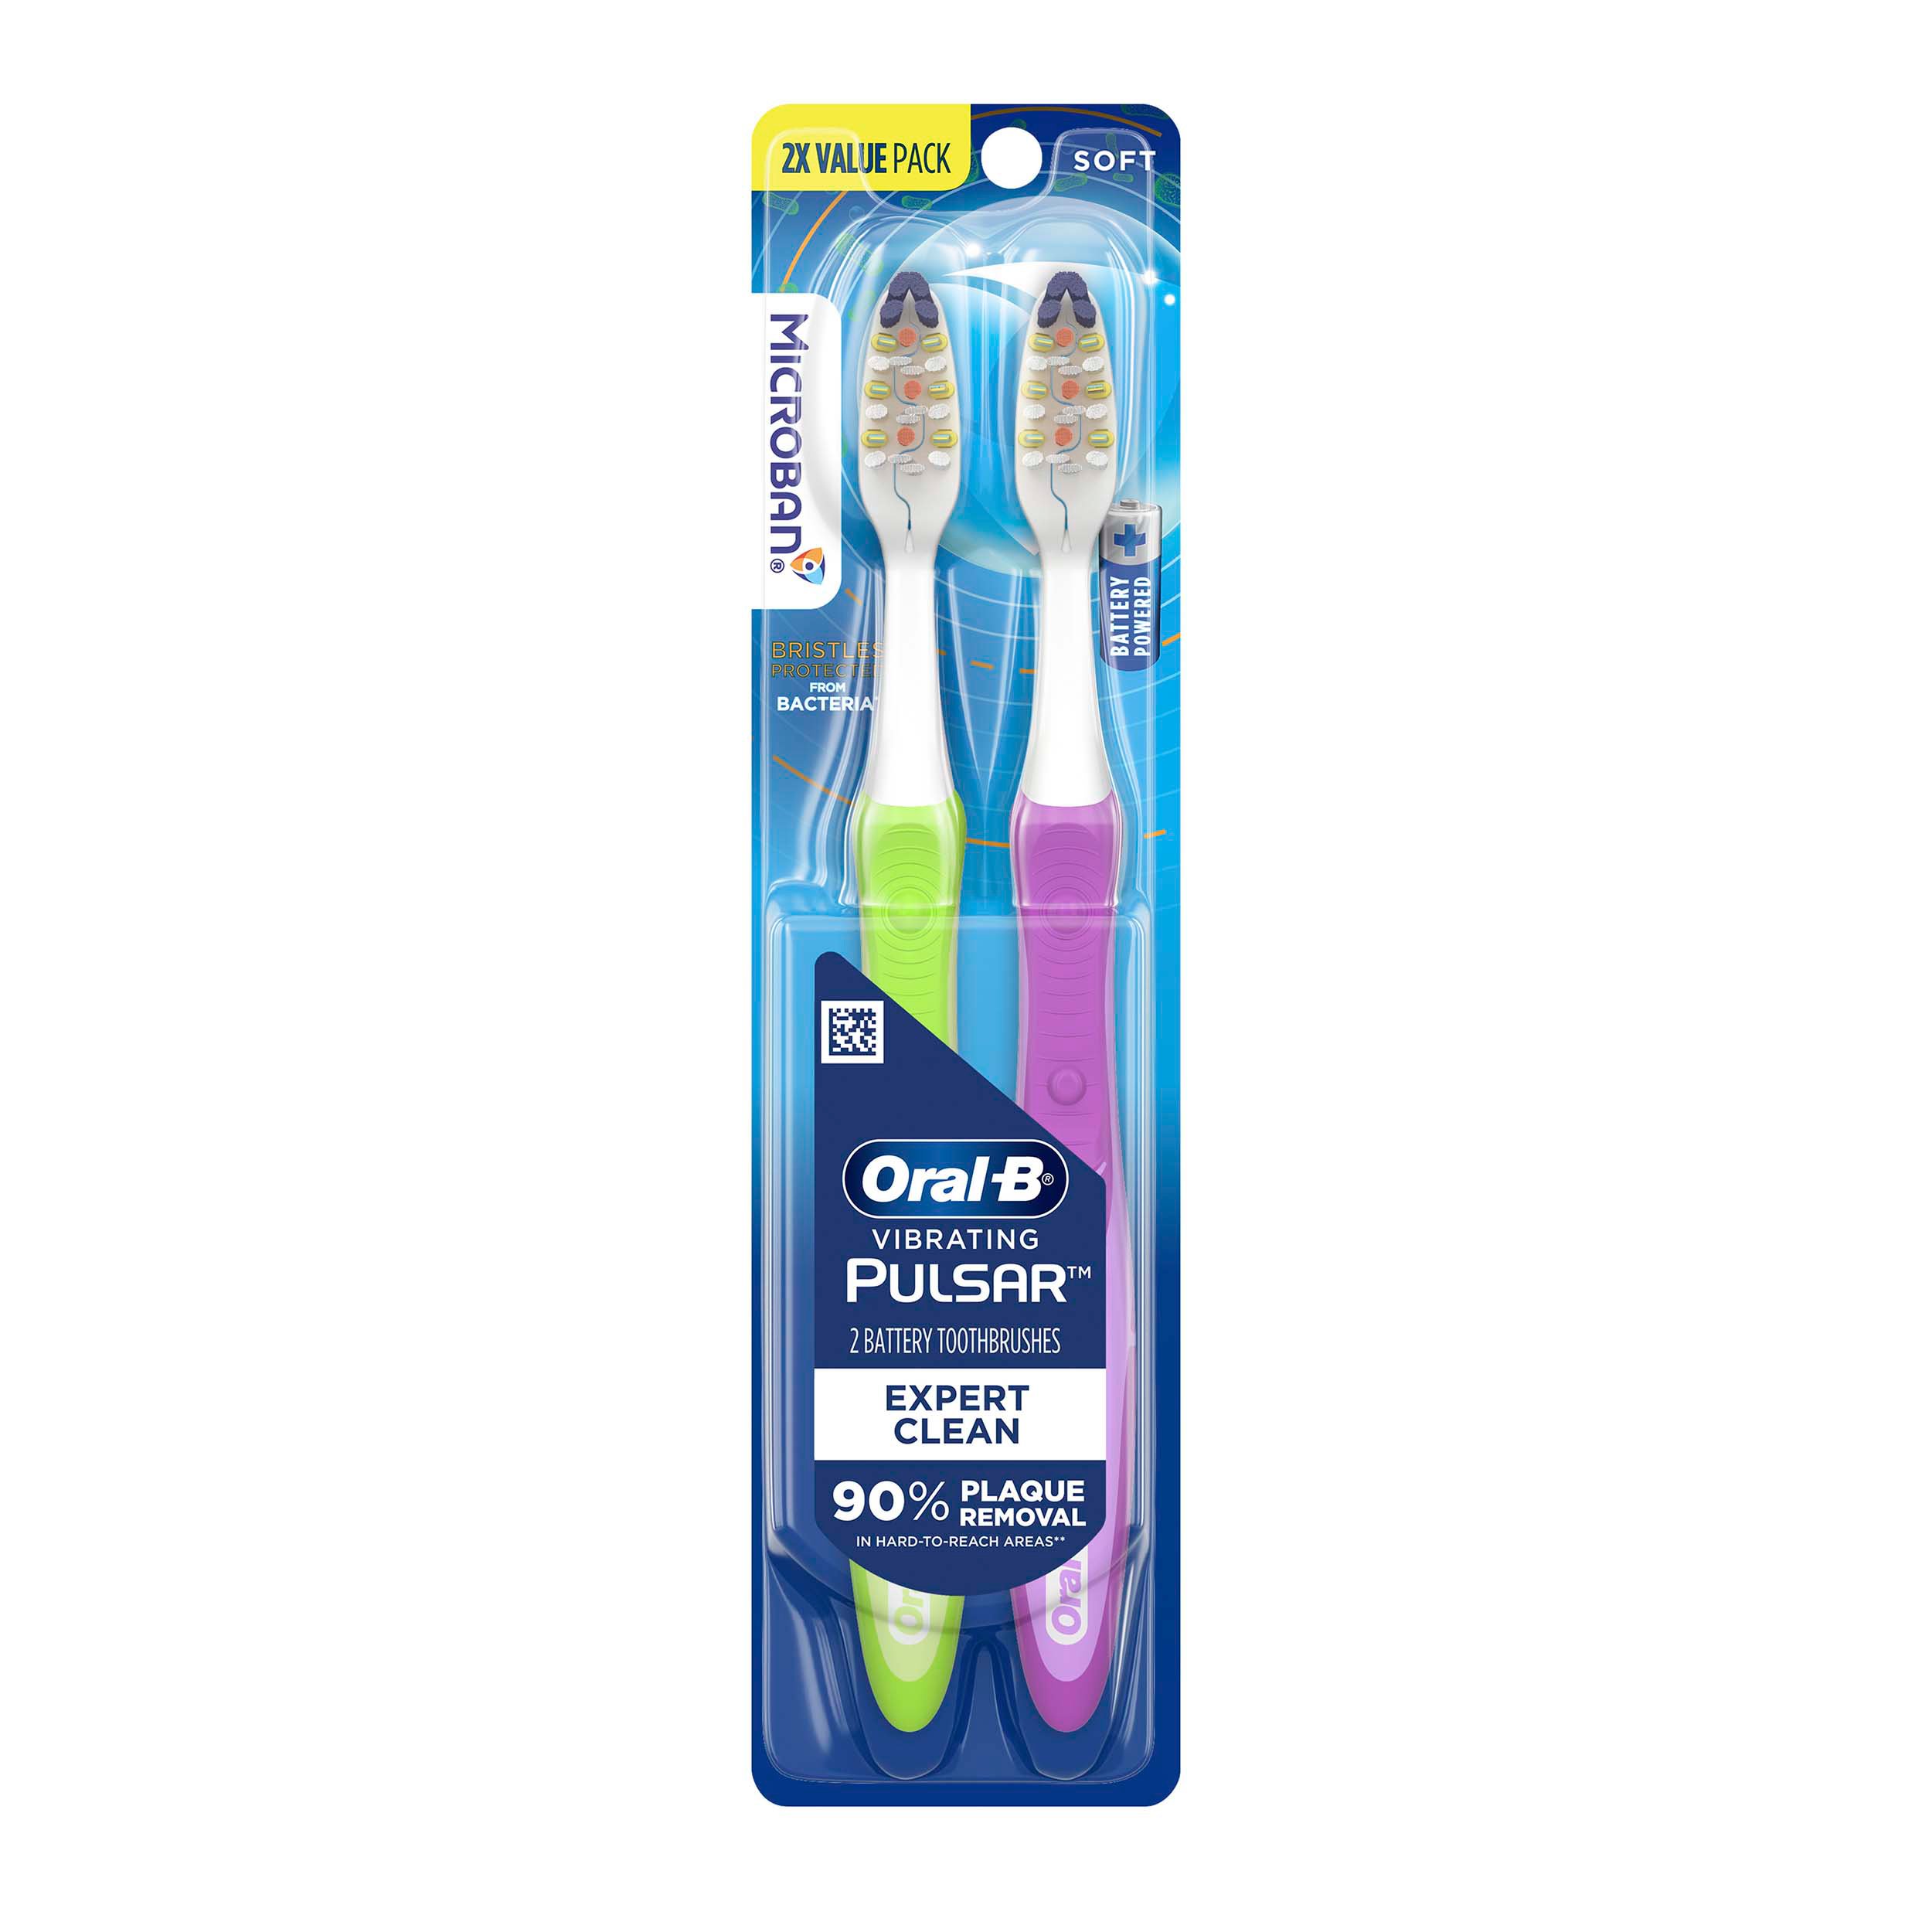 Planeet Productiviteit motor Oral-B Pulsar Expert Clean Battery Toothbrushes Soft - Shop Oral Hygiene at  H-E-B